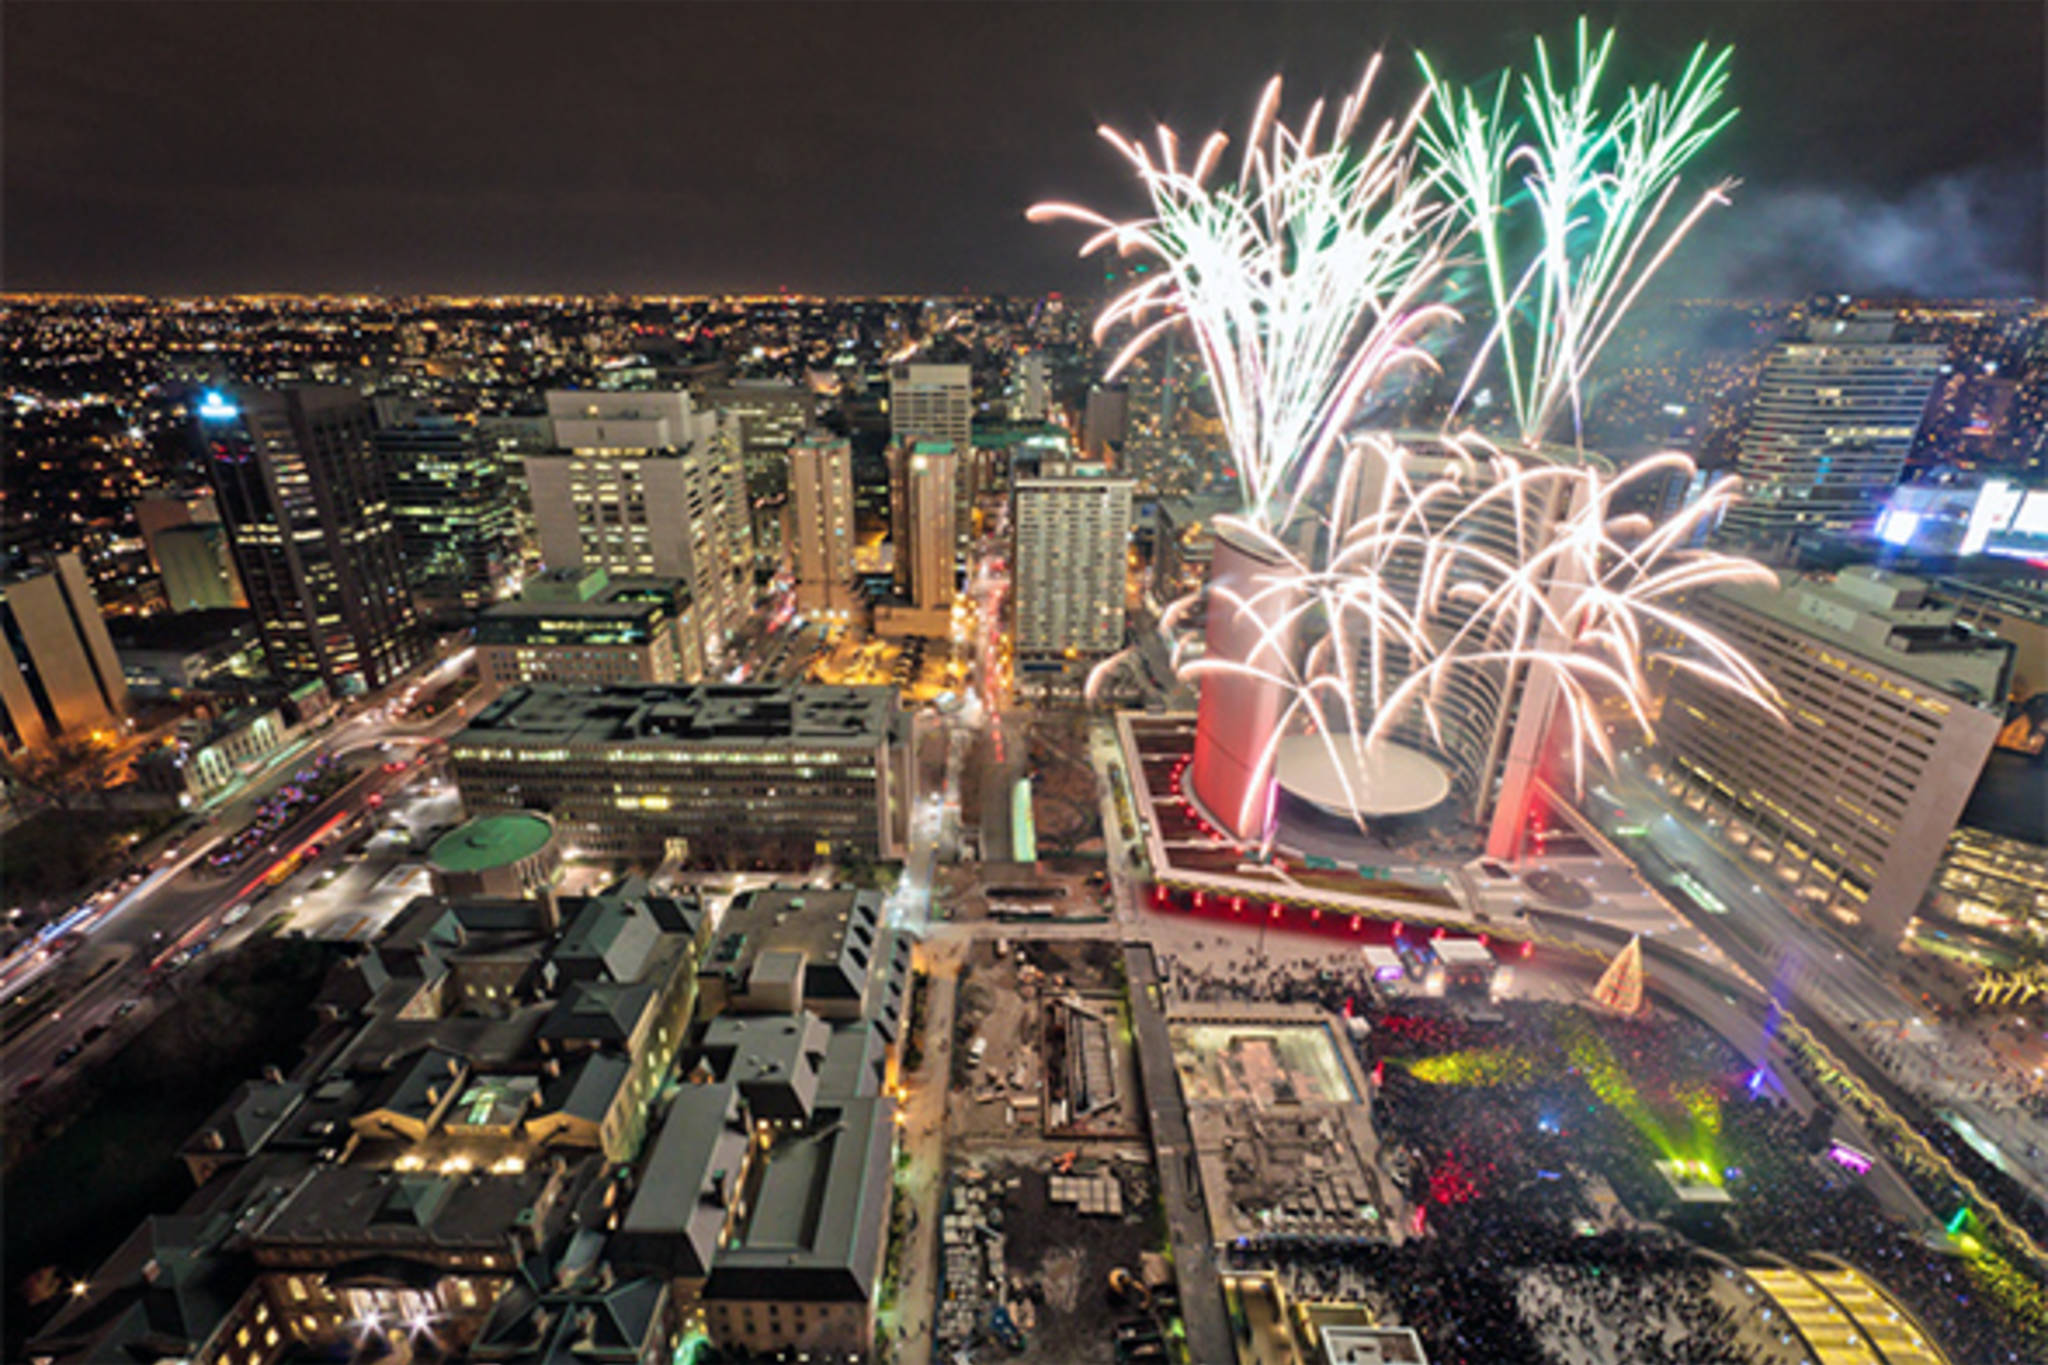 Huge fireworks show happening in Toronto this month